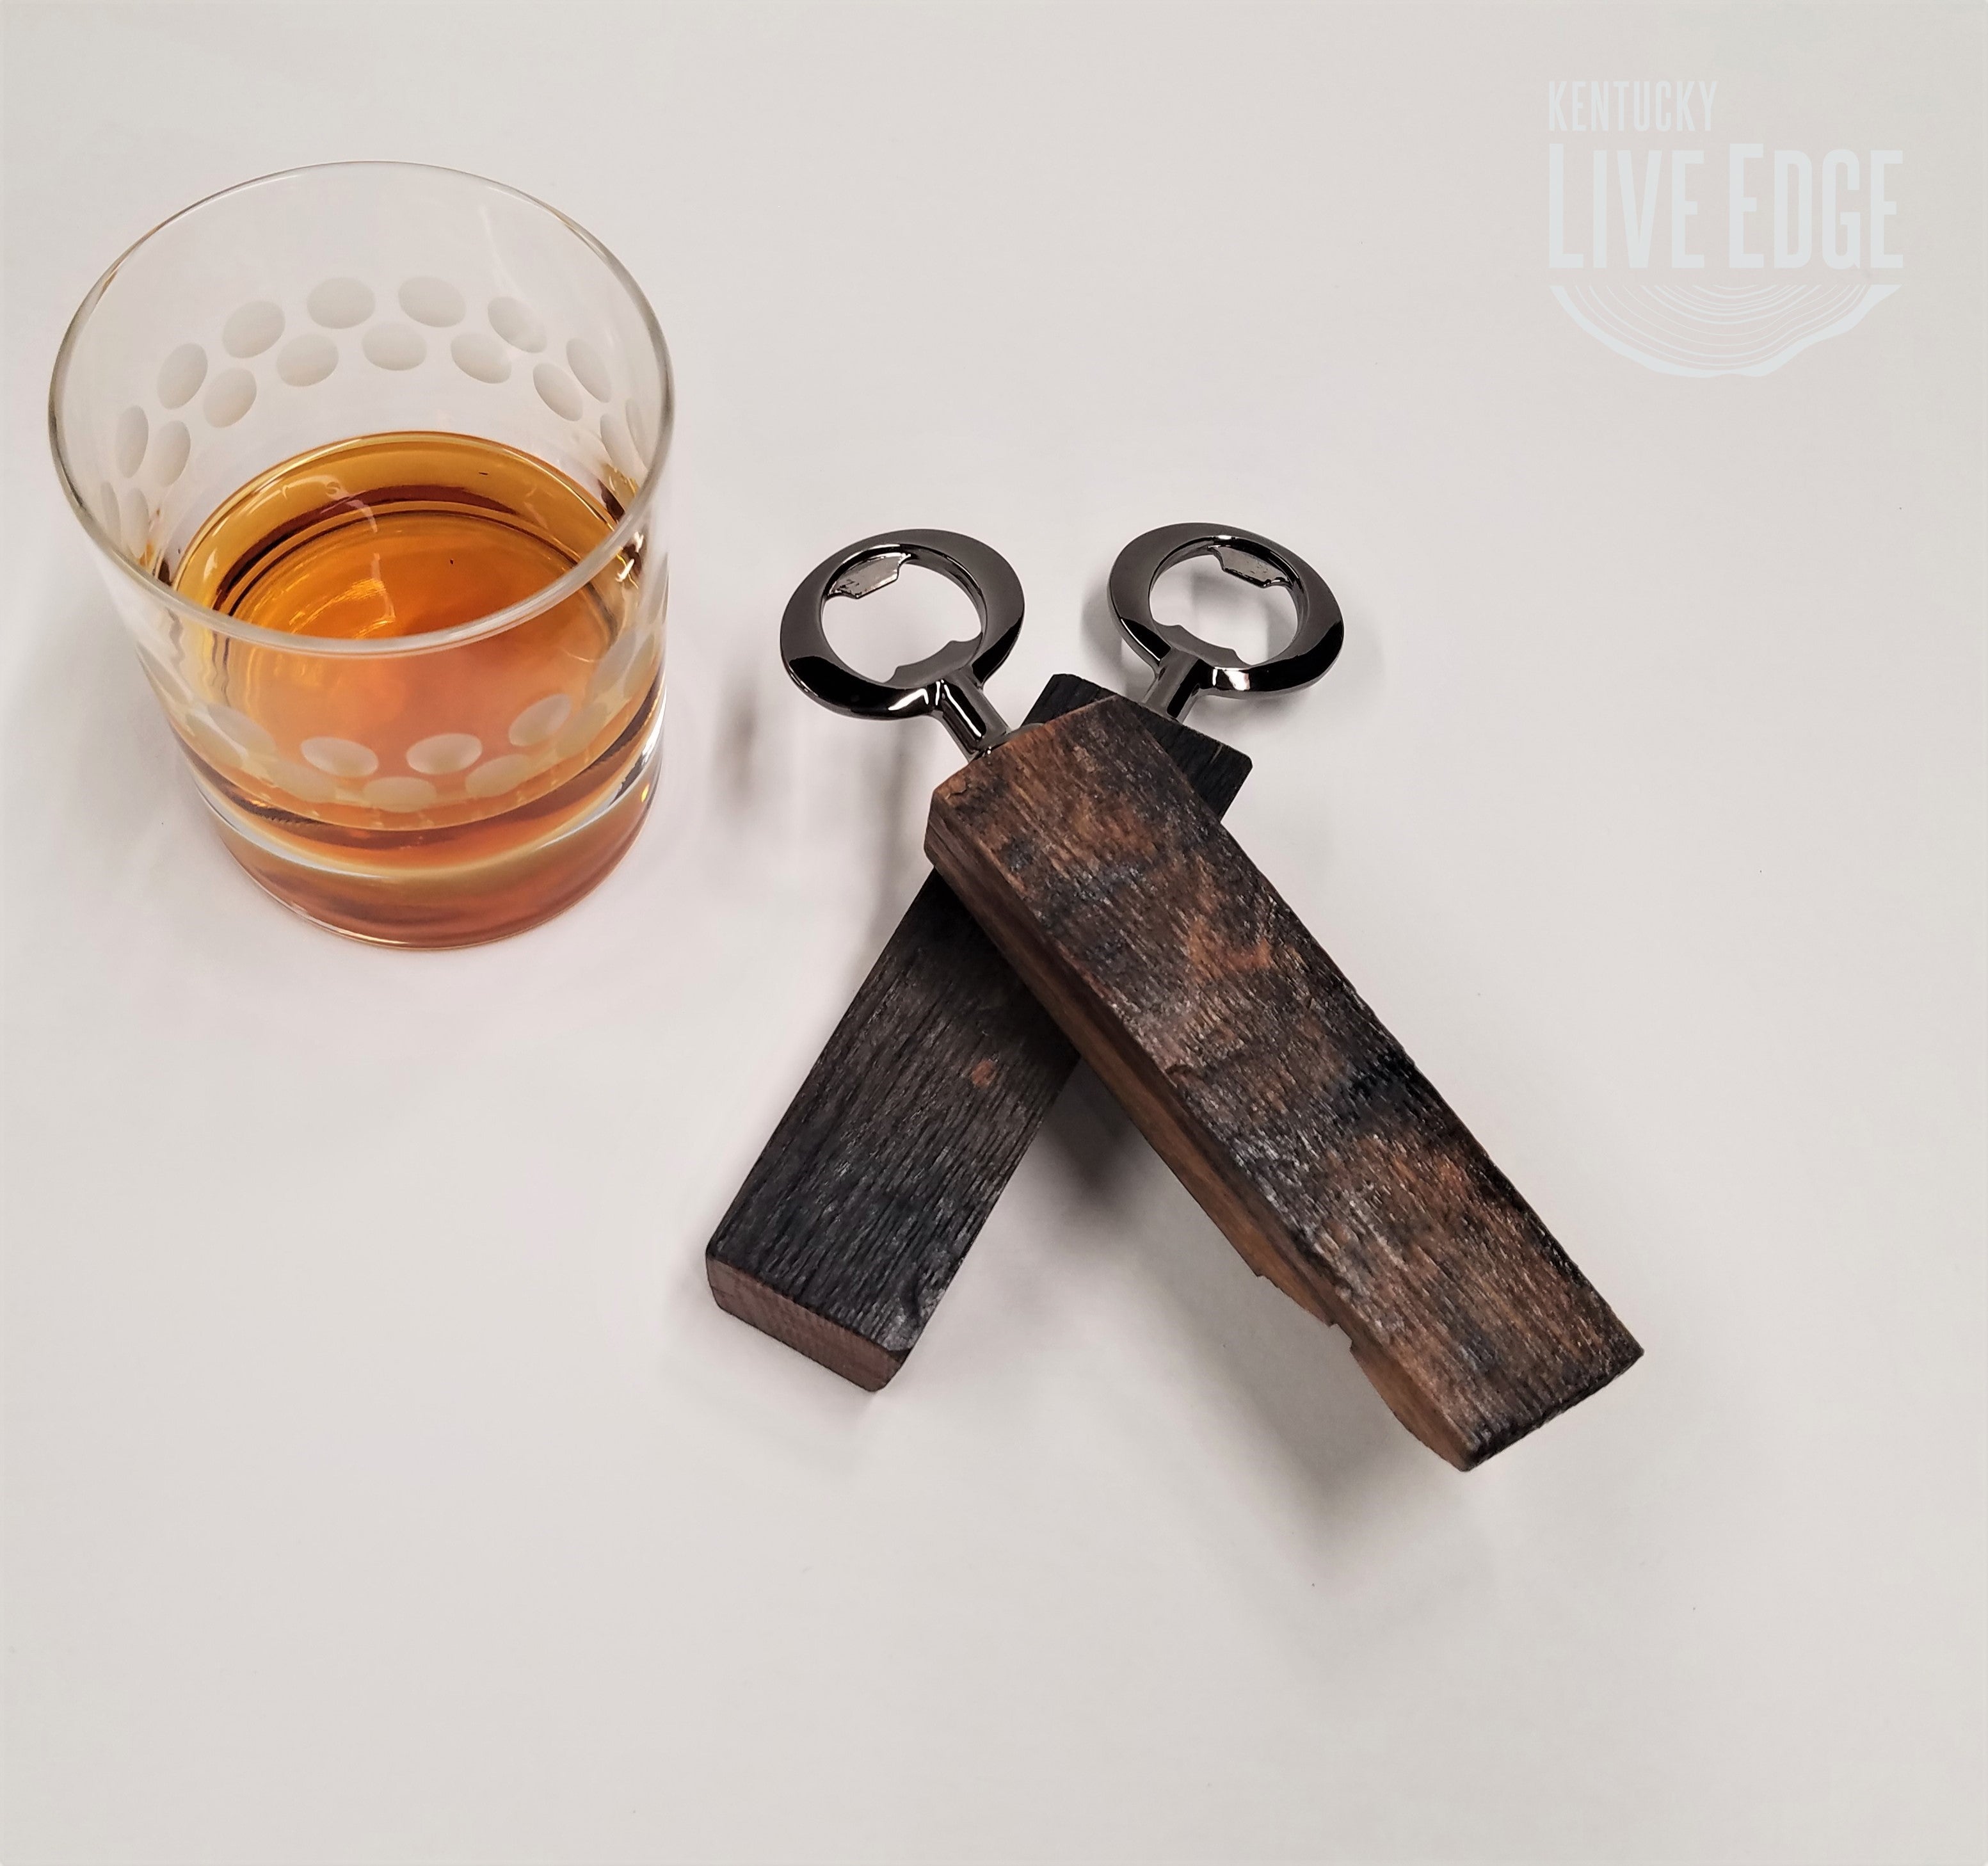 Bourbon & Tobacco Gifts